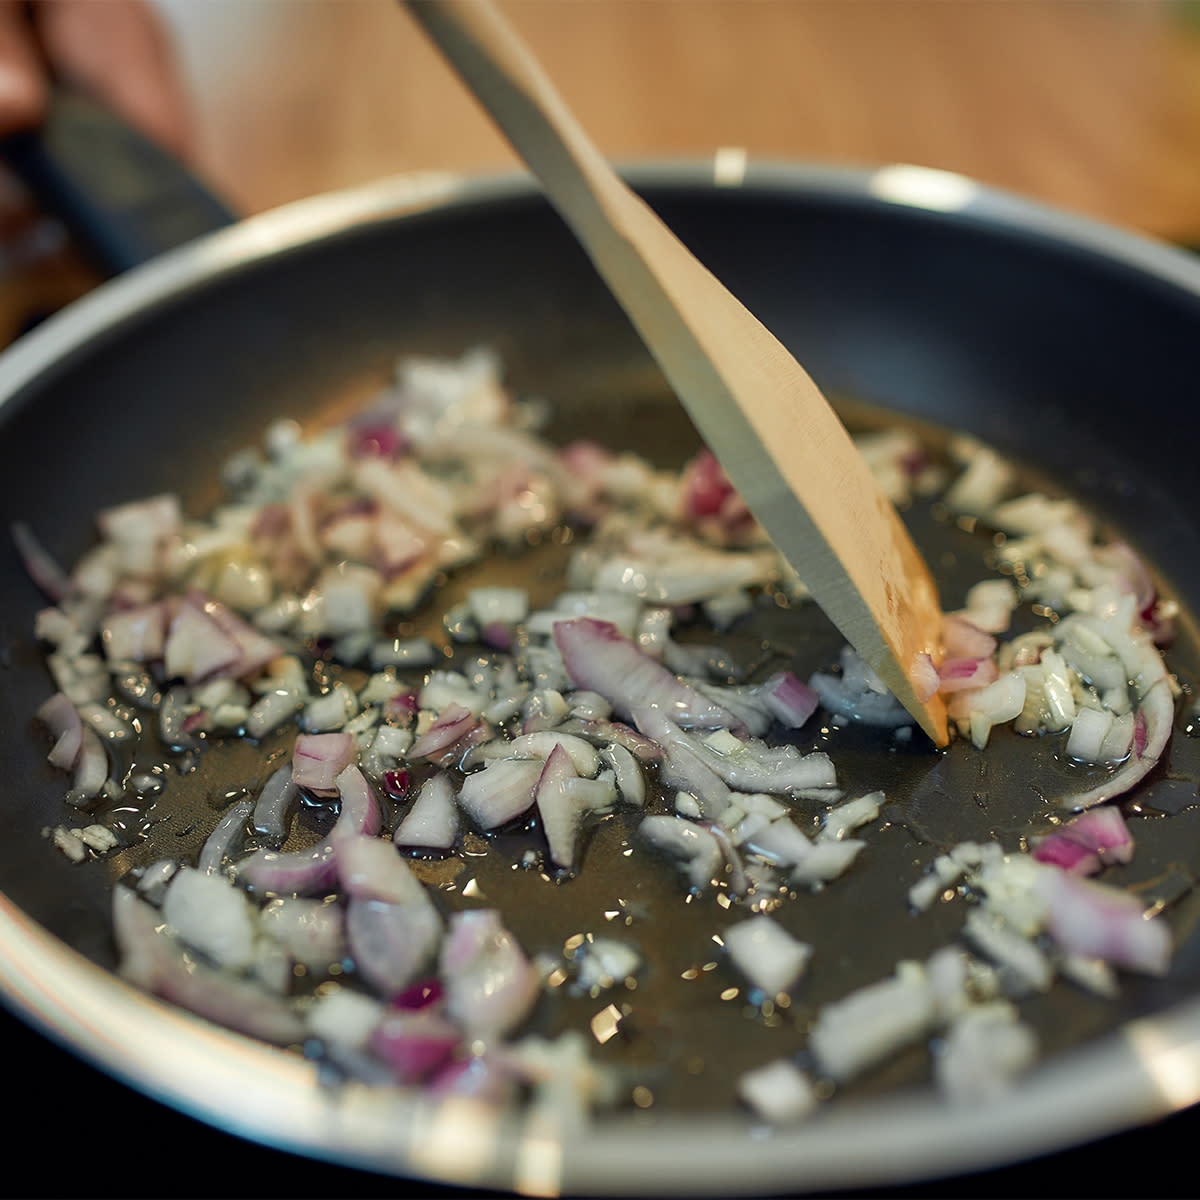 red onions sauteeing in oil